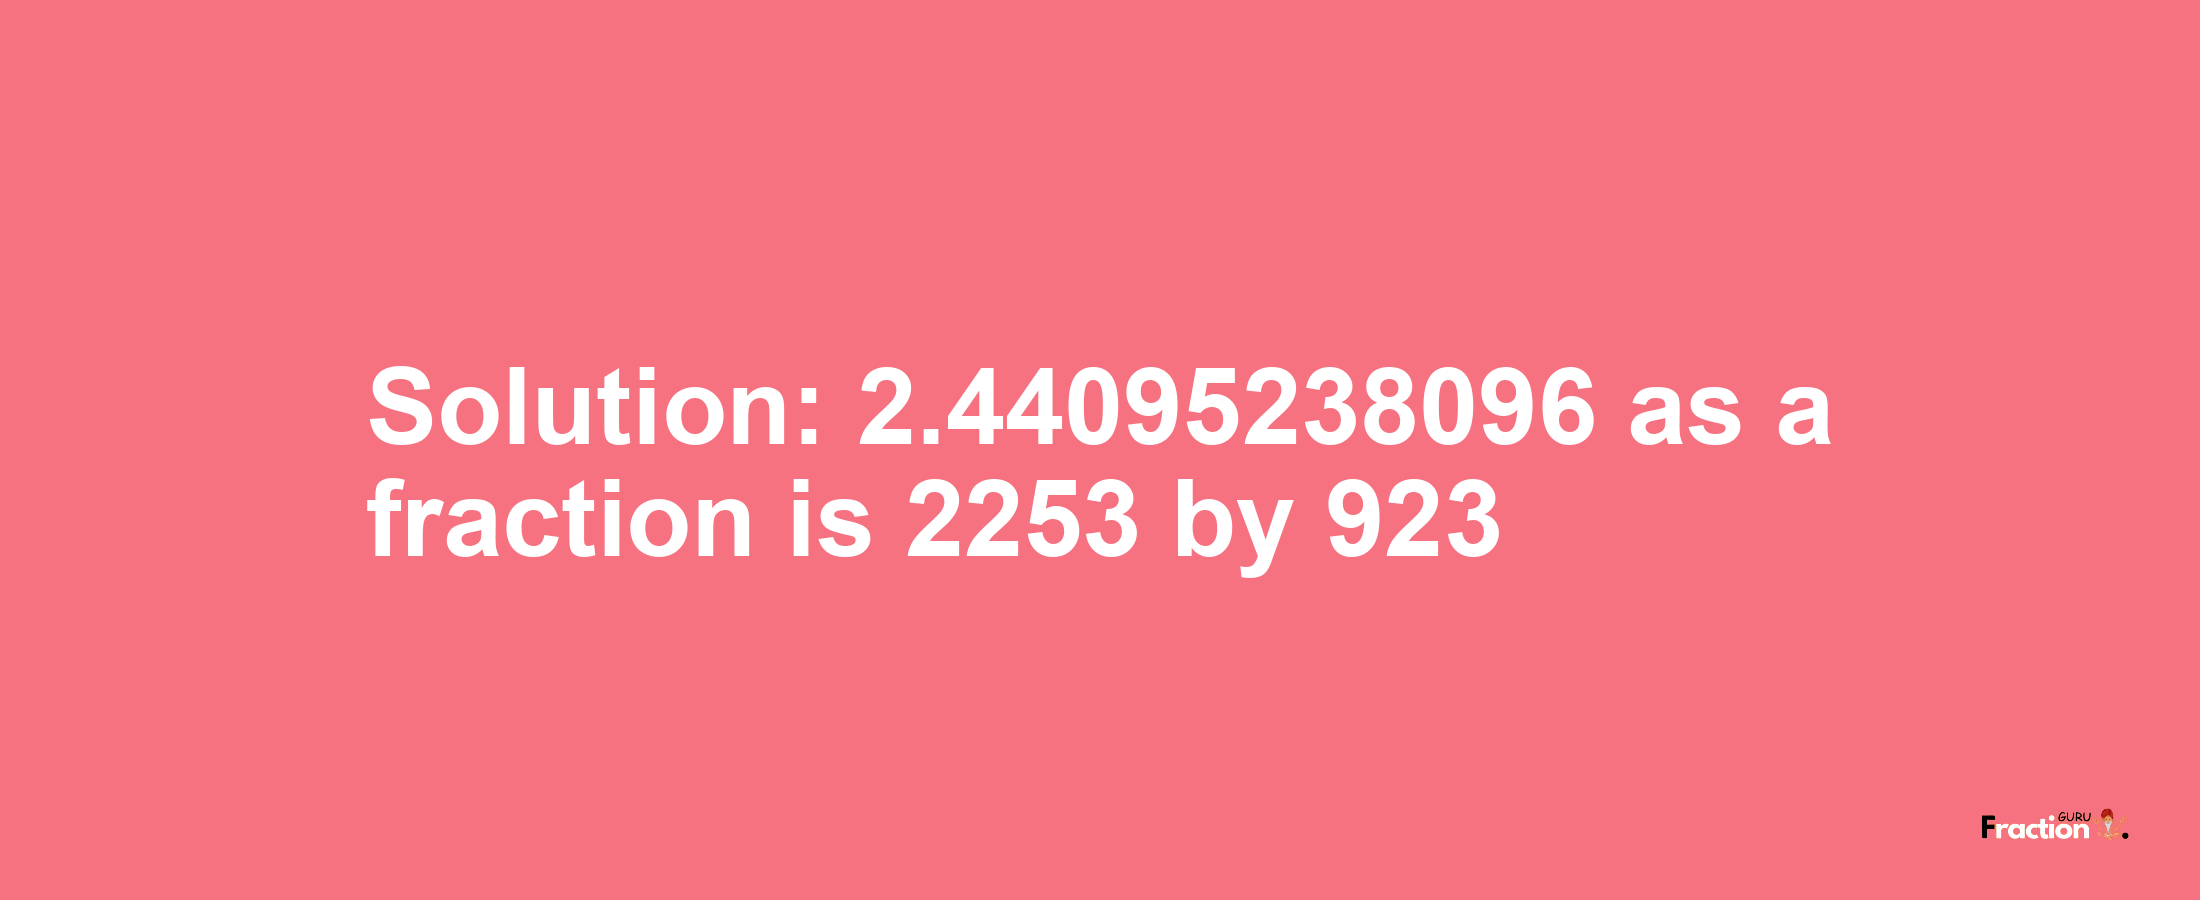 Solution:2.44095238096 as a fraction is 2253/923